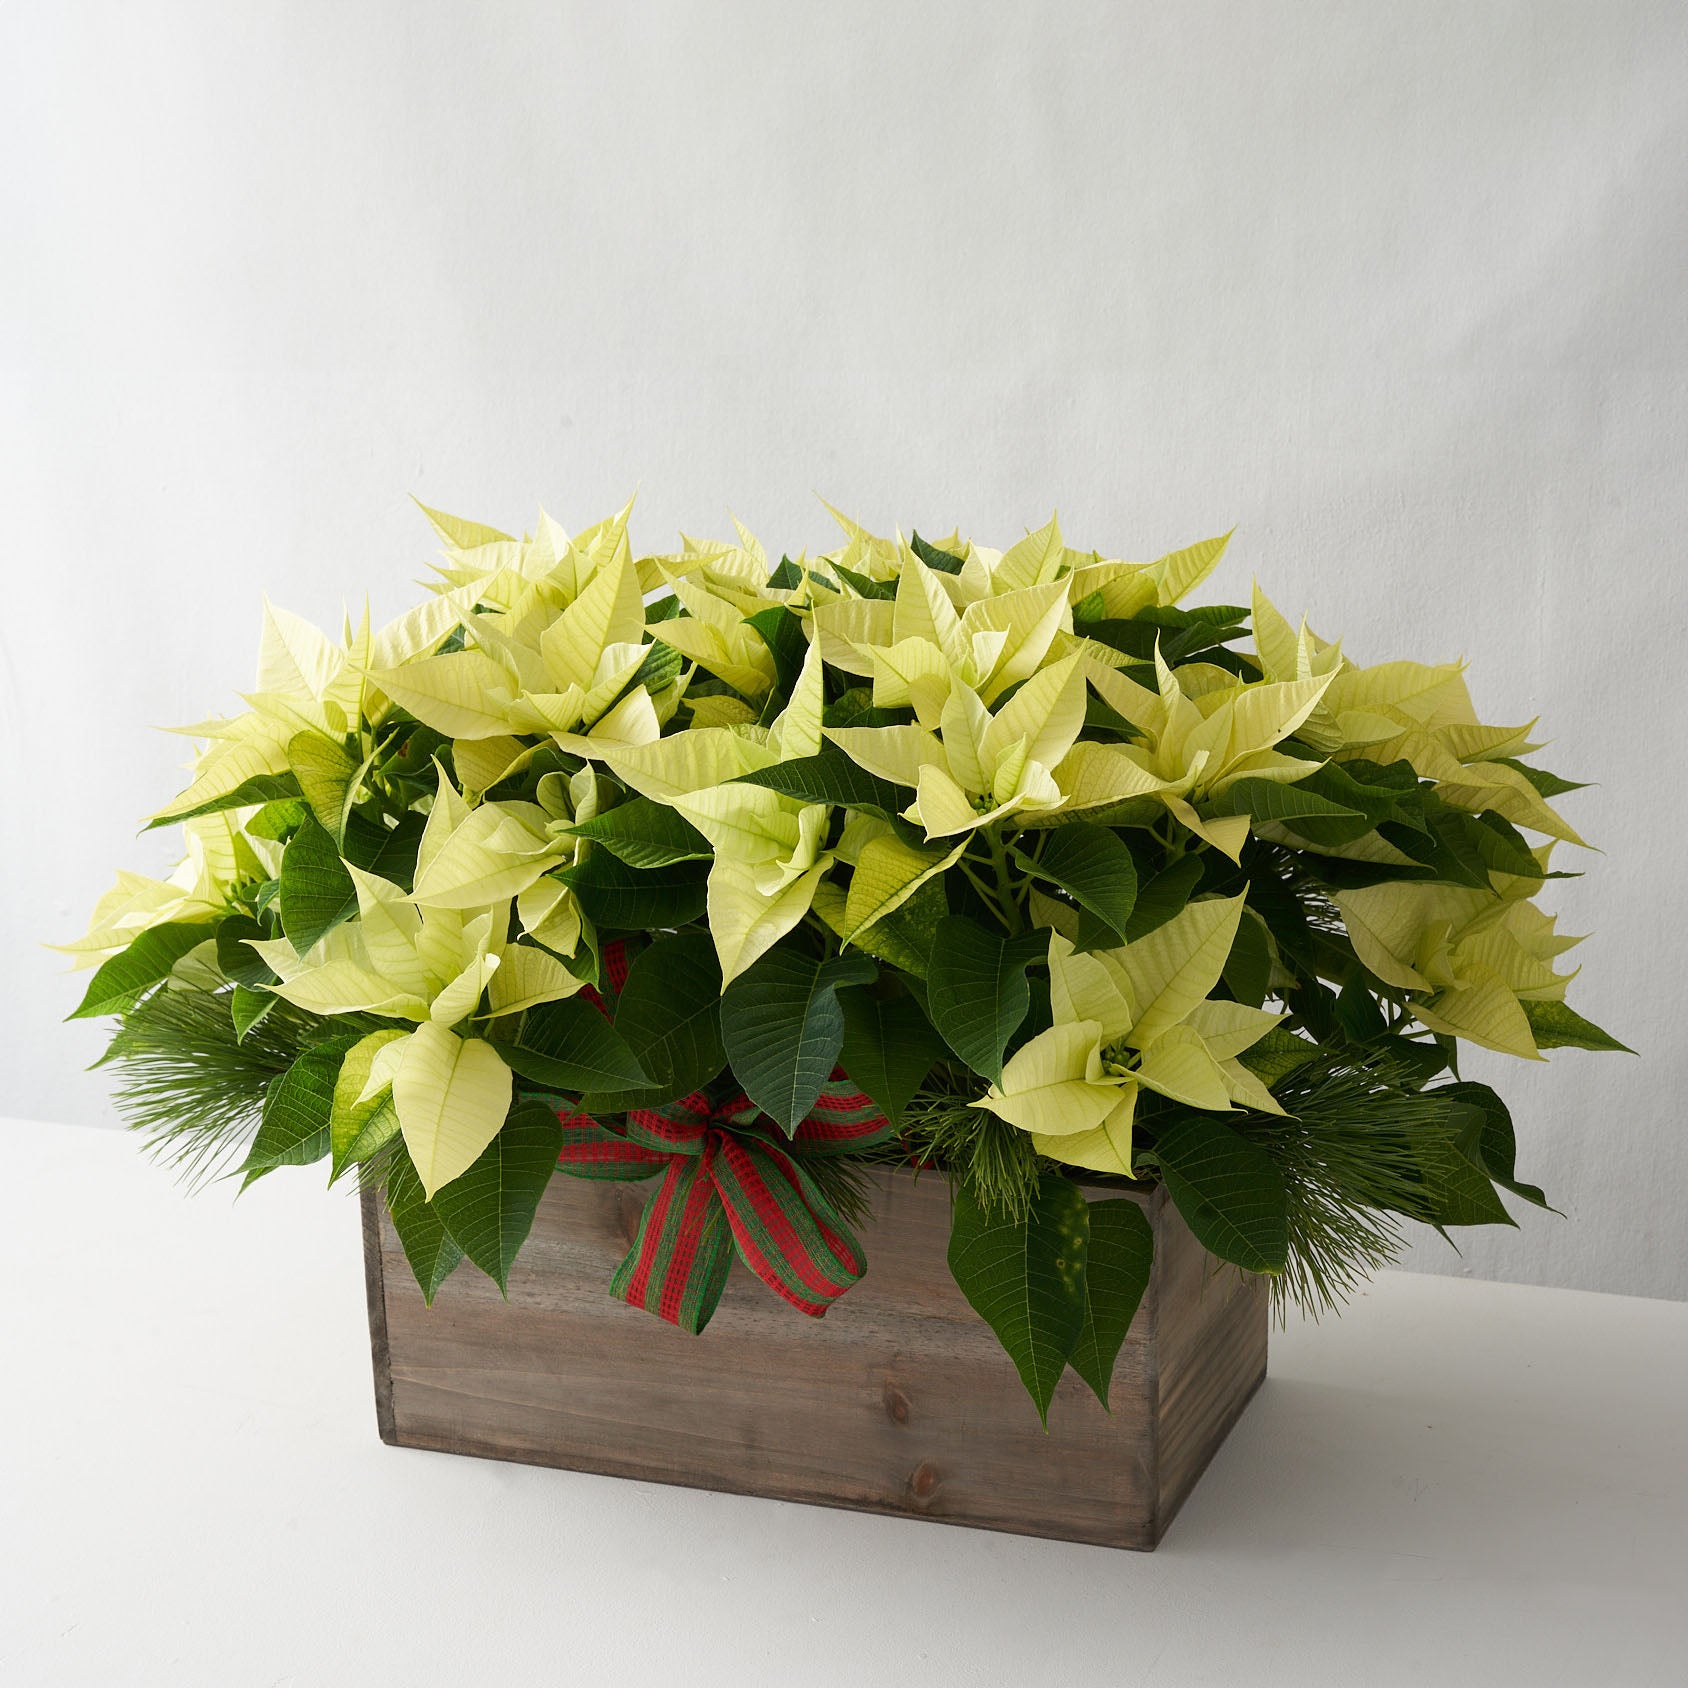 White poinsettia in a wooden box with pine boughs and a red and green bow.